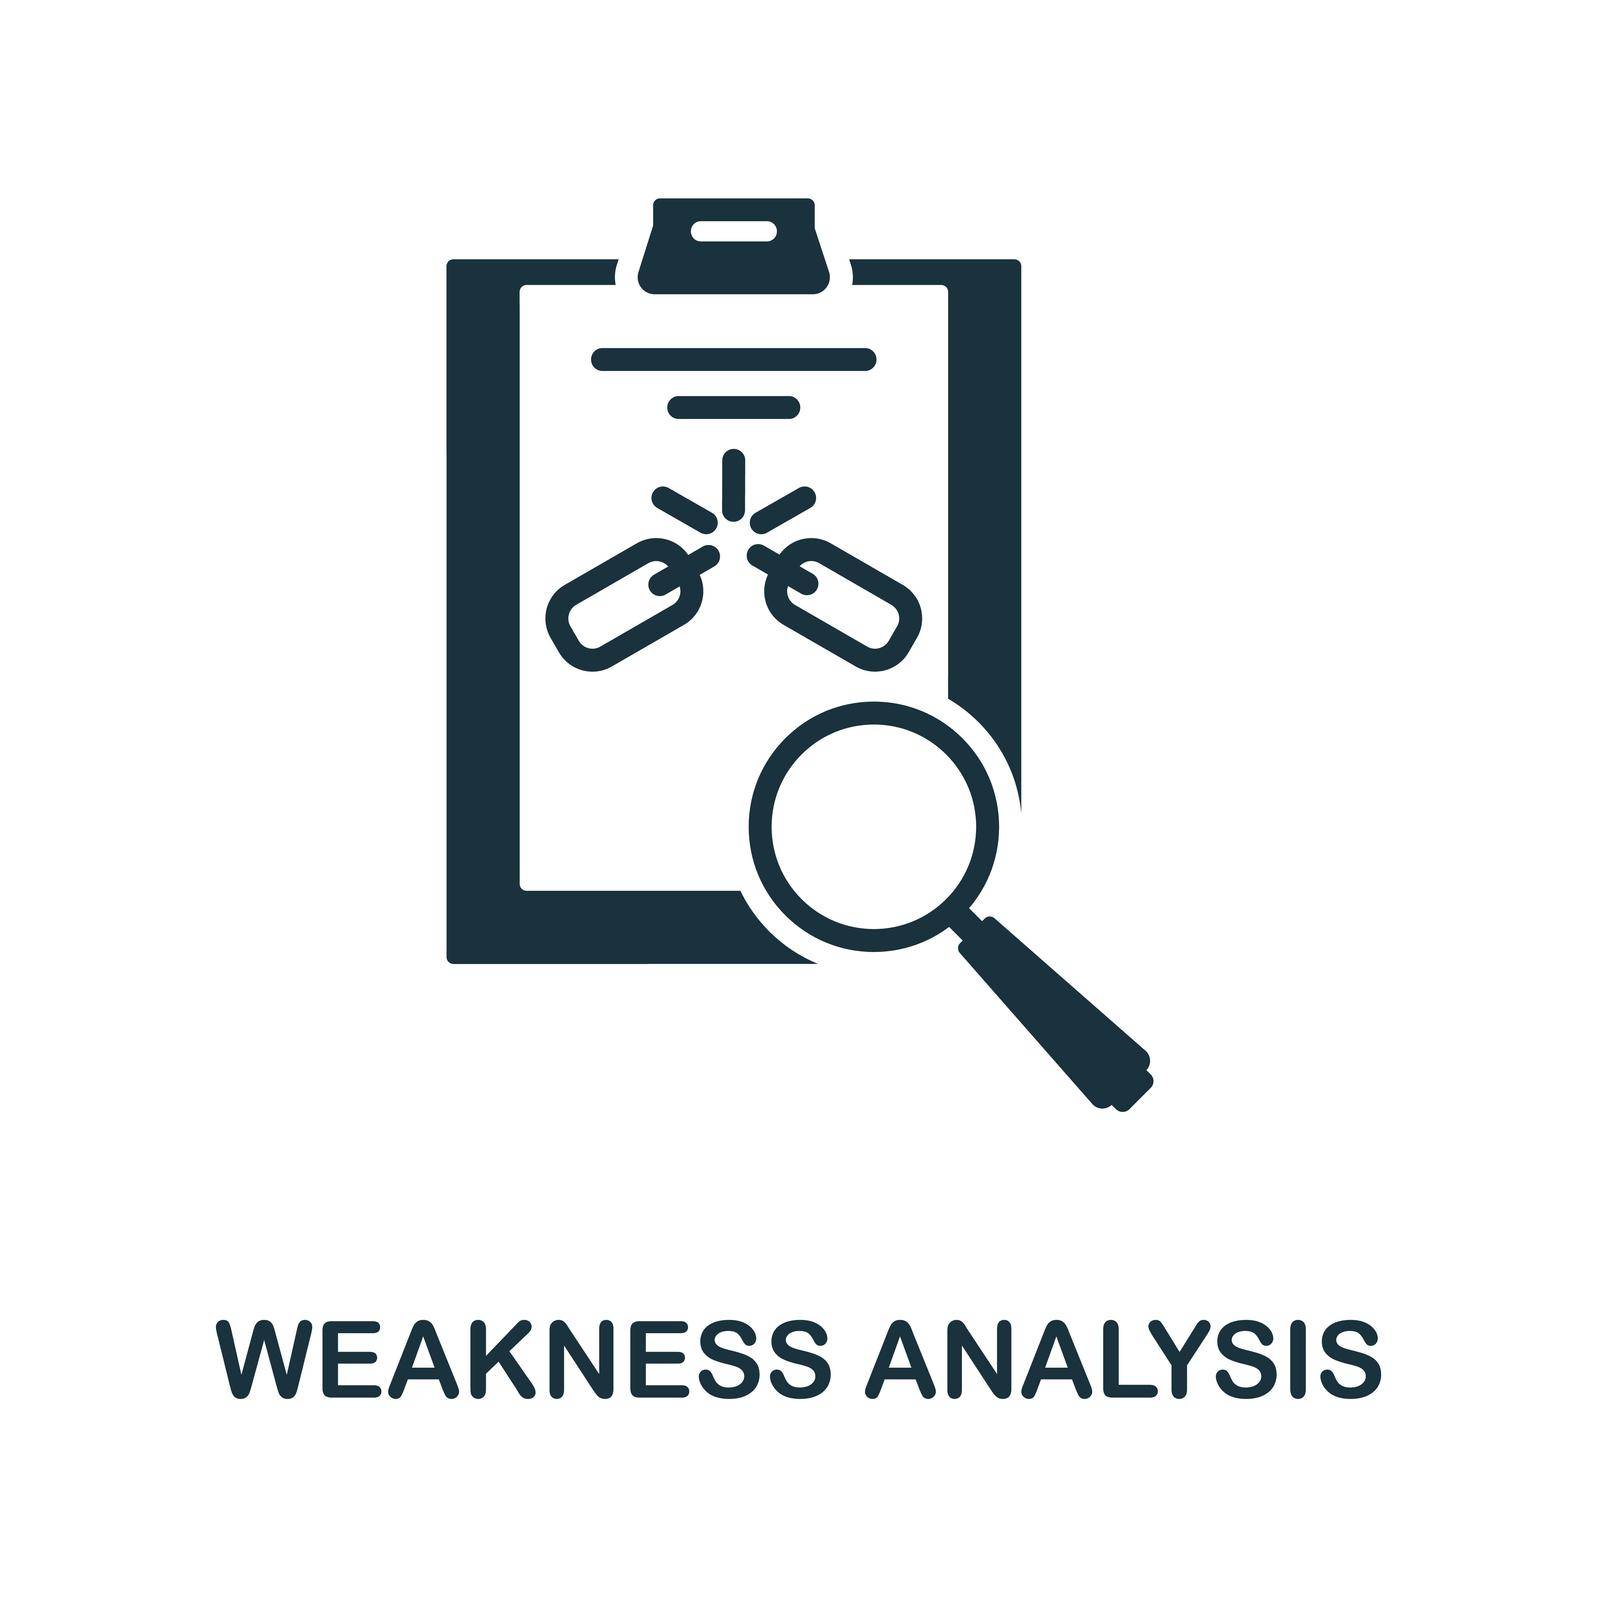 Weakness Analysis icon. Monochrome sign from corporate development collection. Creative Weakness Analysis icon illustration for web design, infographics and more by simakovavector